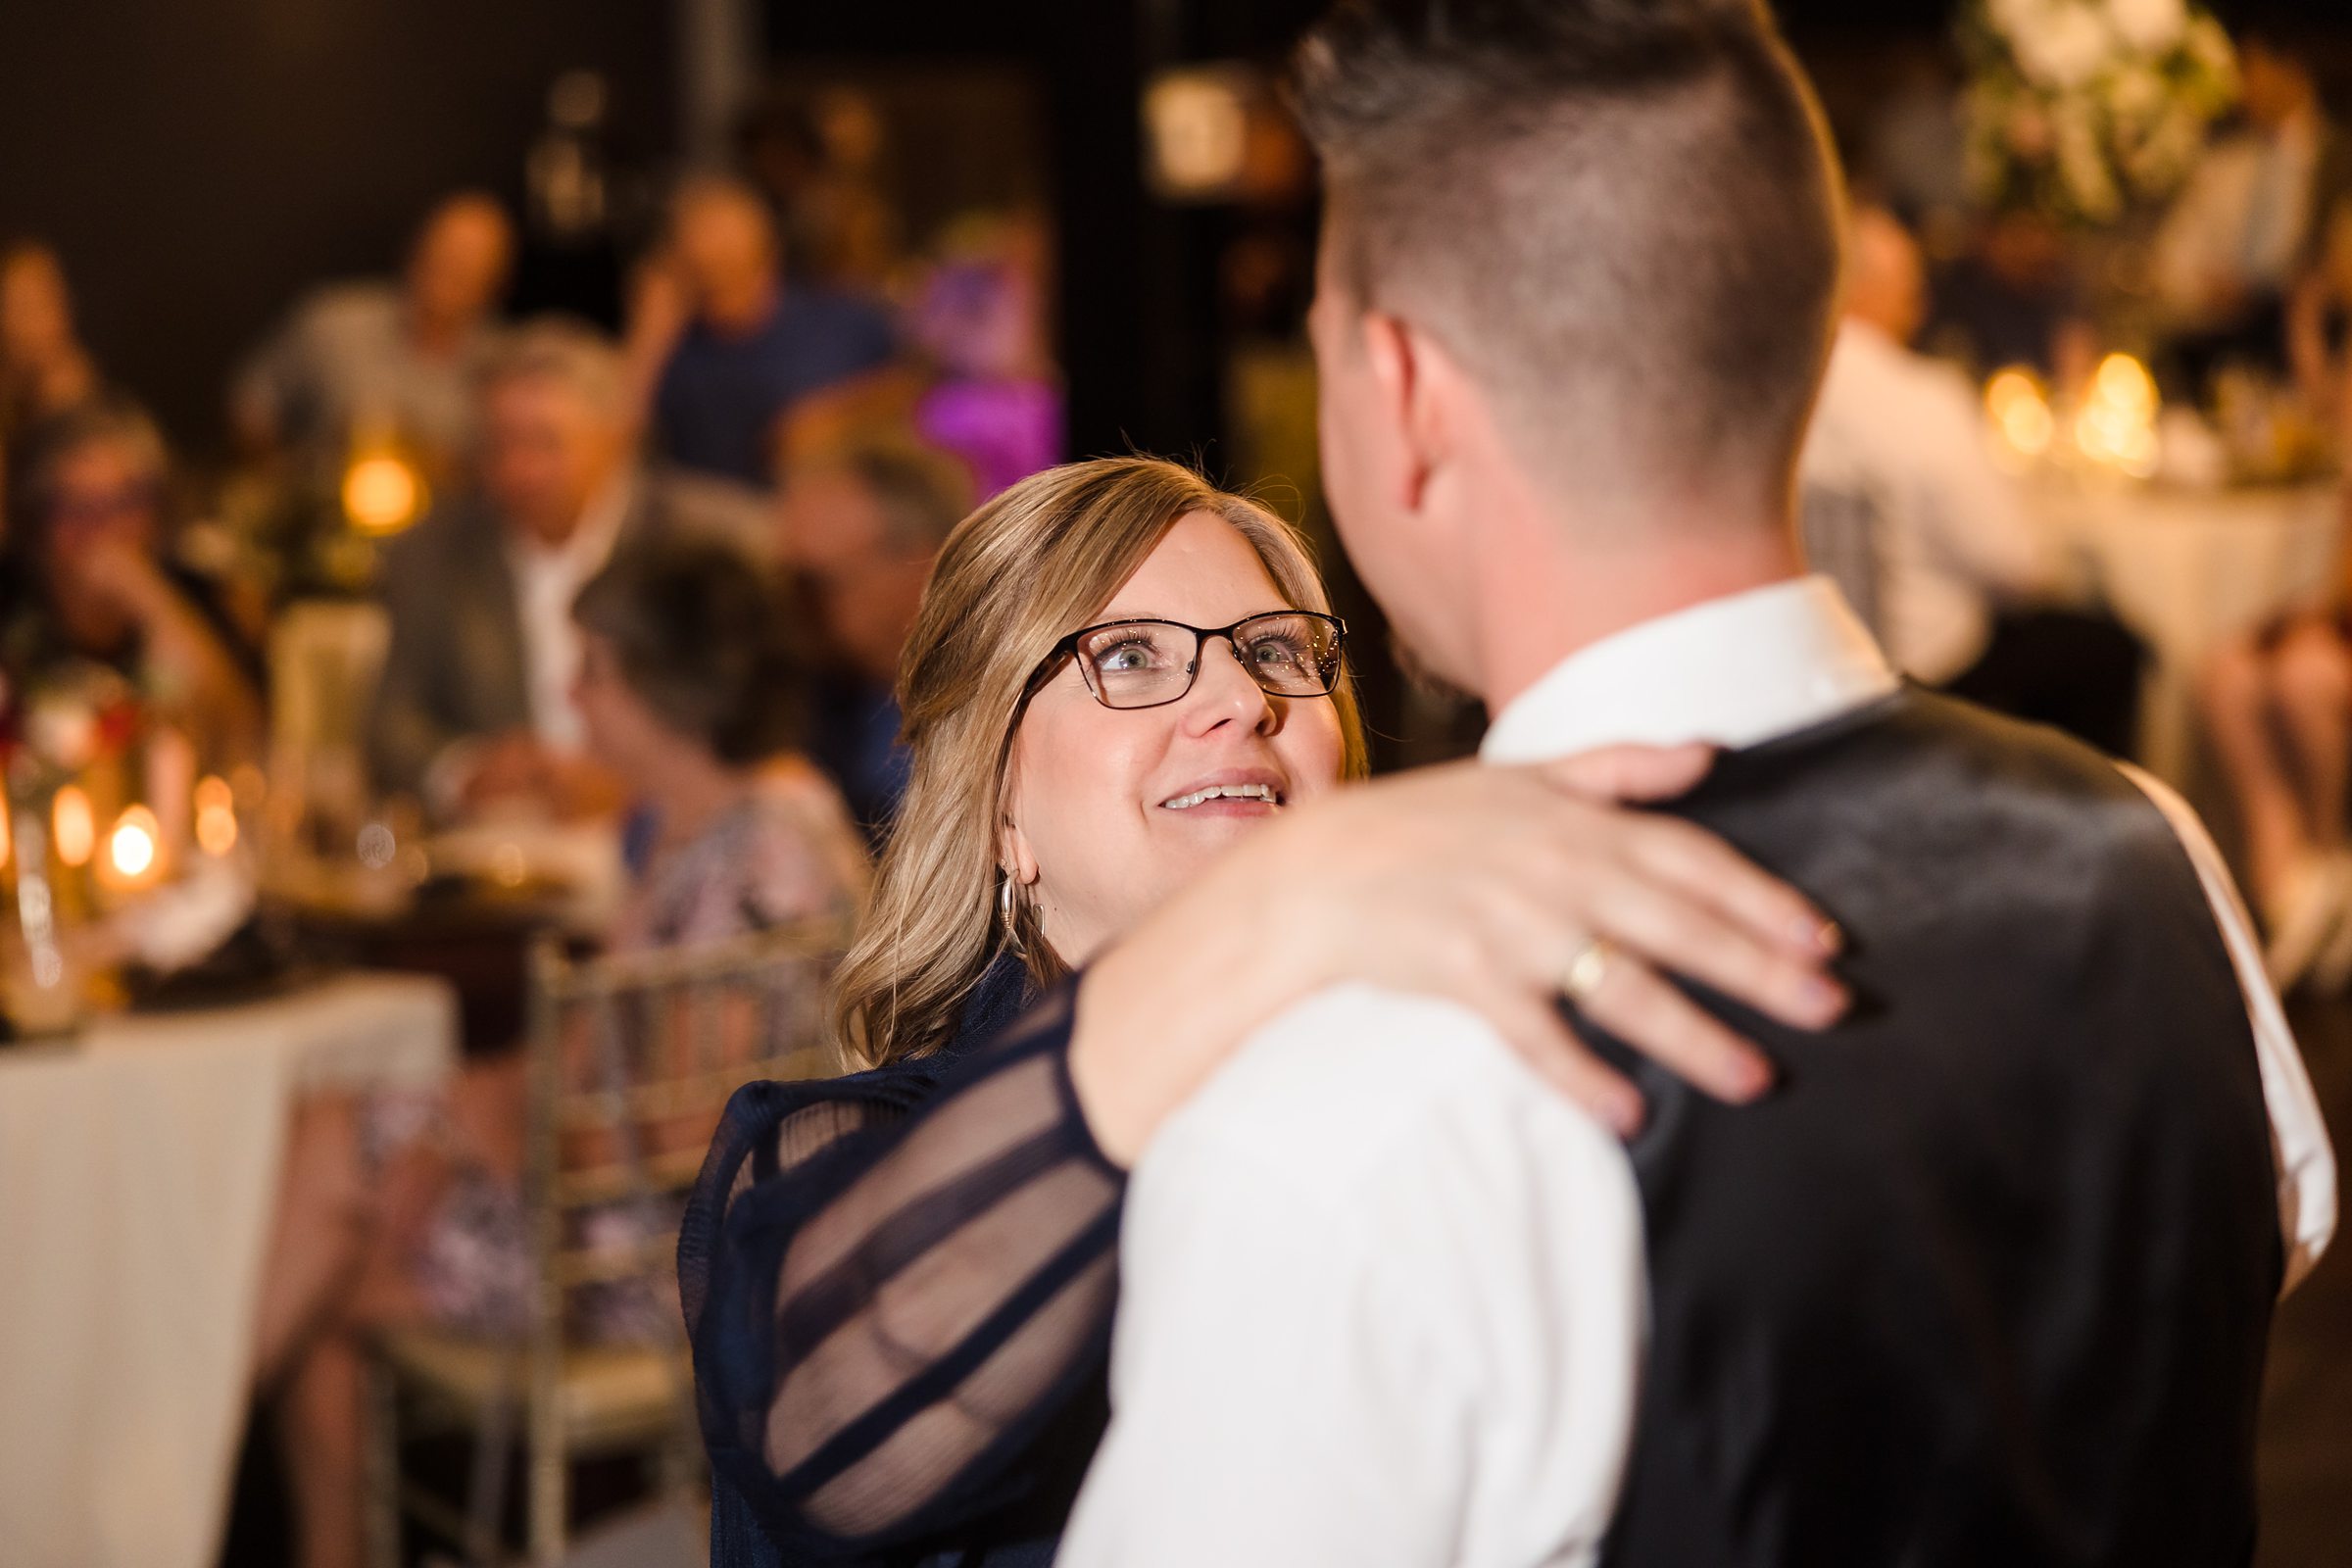 The groom dances with her son during his wedding at the Warehouse on State in Peoria, Illinois